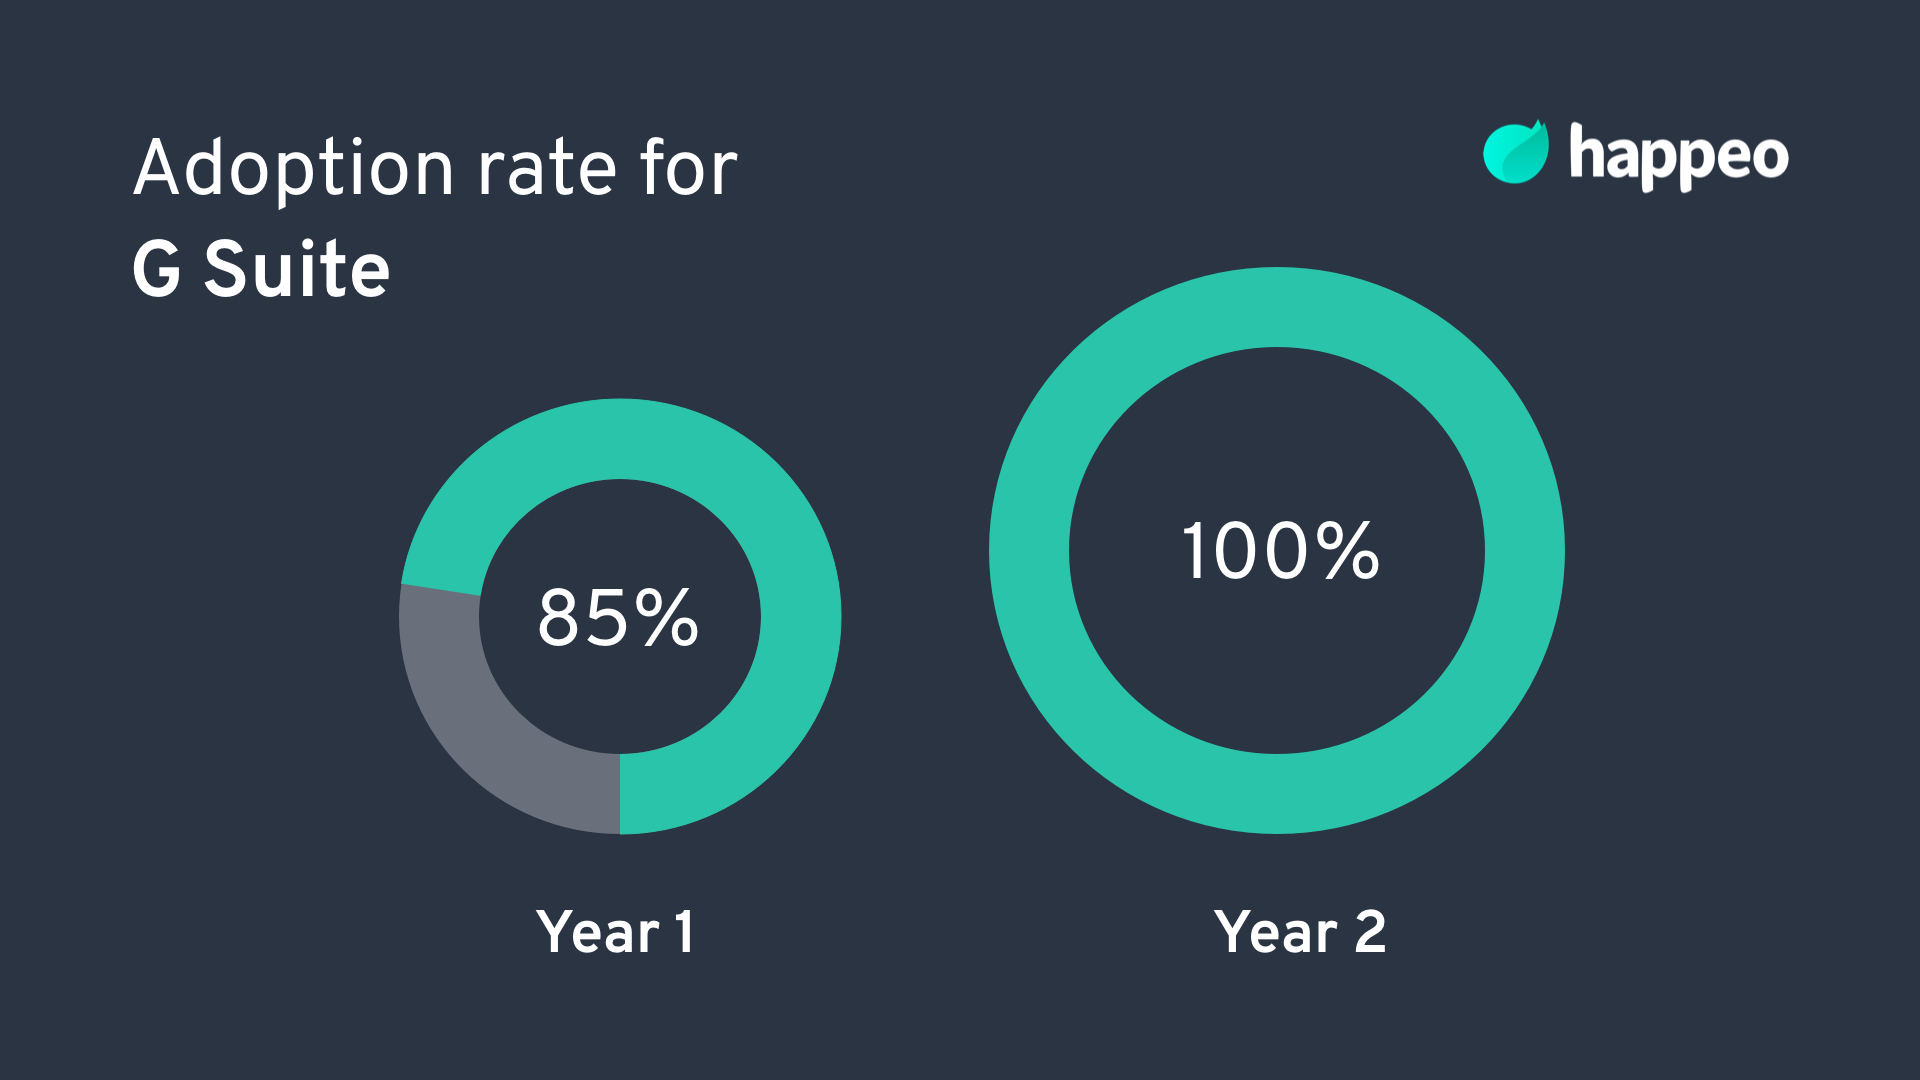 Adoption rate for G suite users